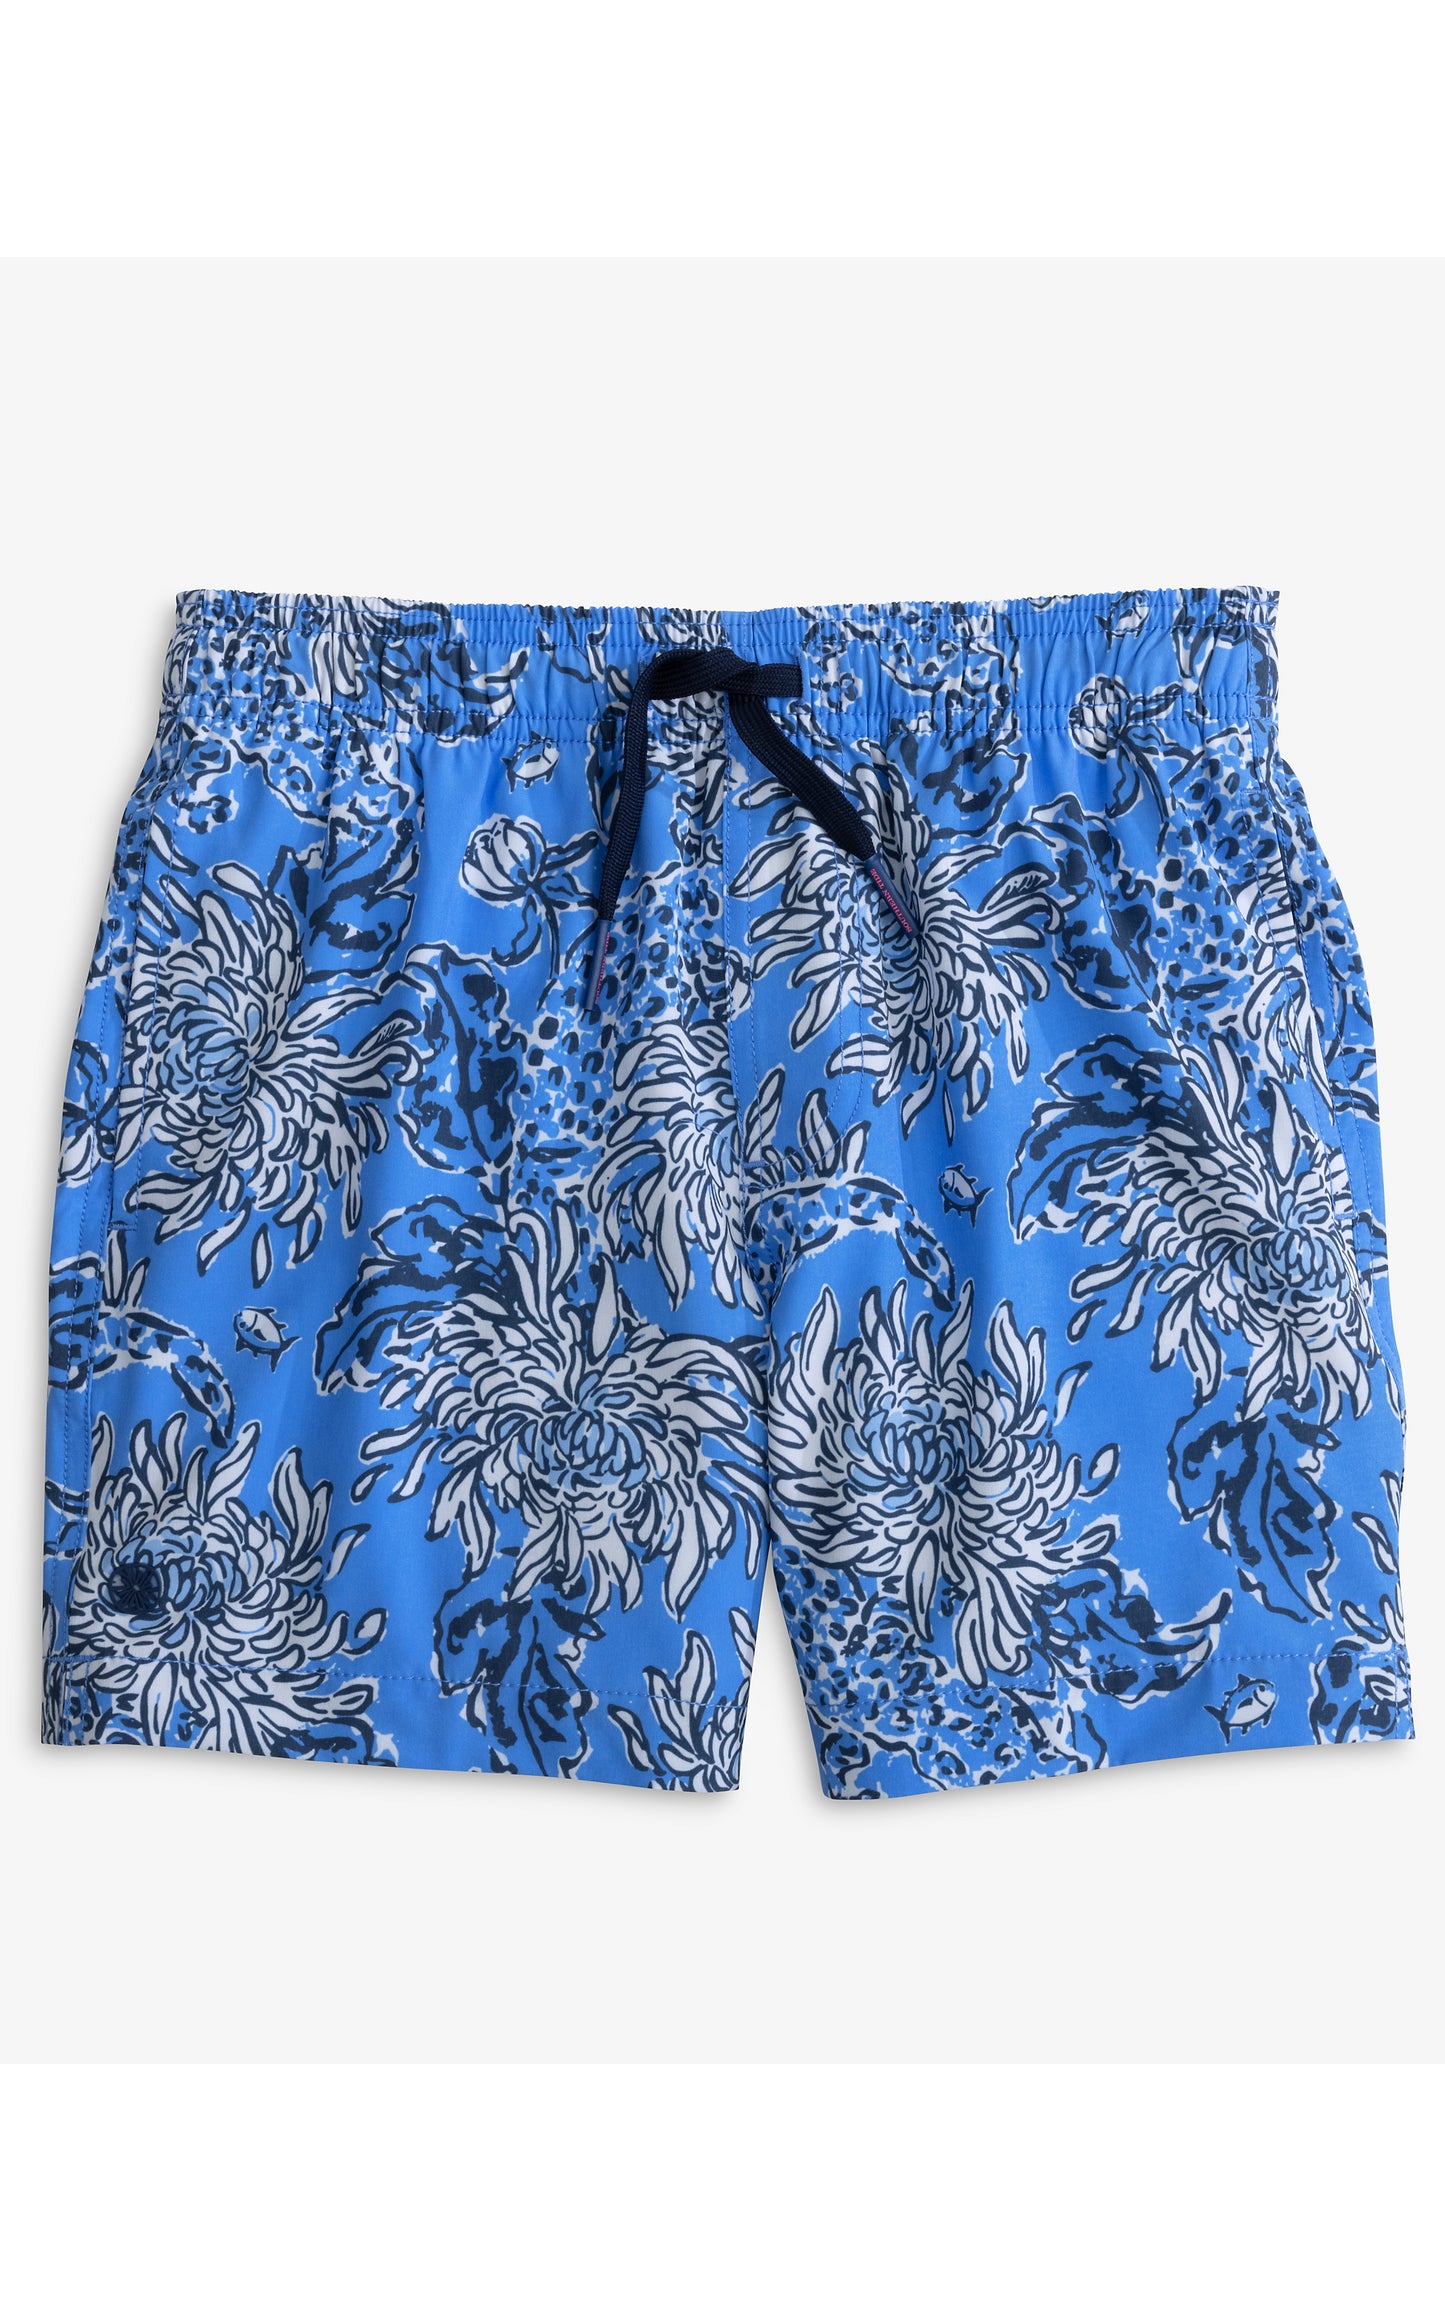 Lilly Pulitzer x Southern Tide: Youth Swim Trunks in Croc and Lock It